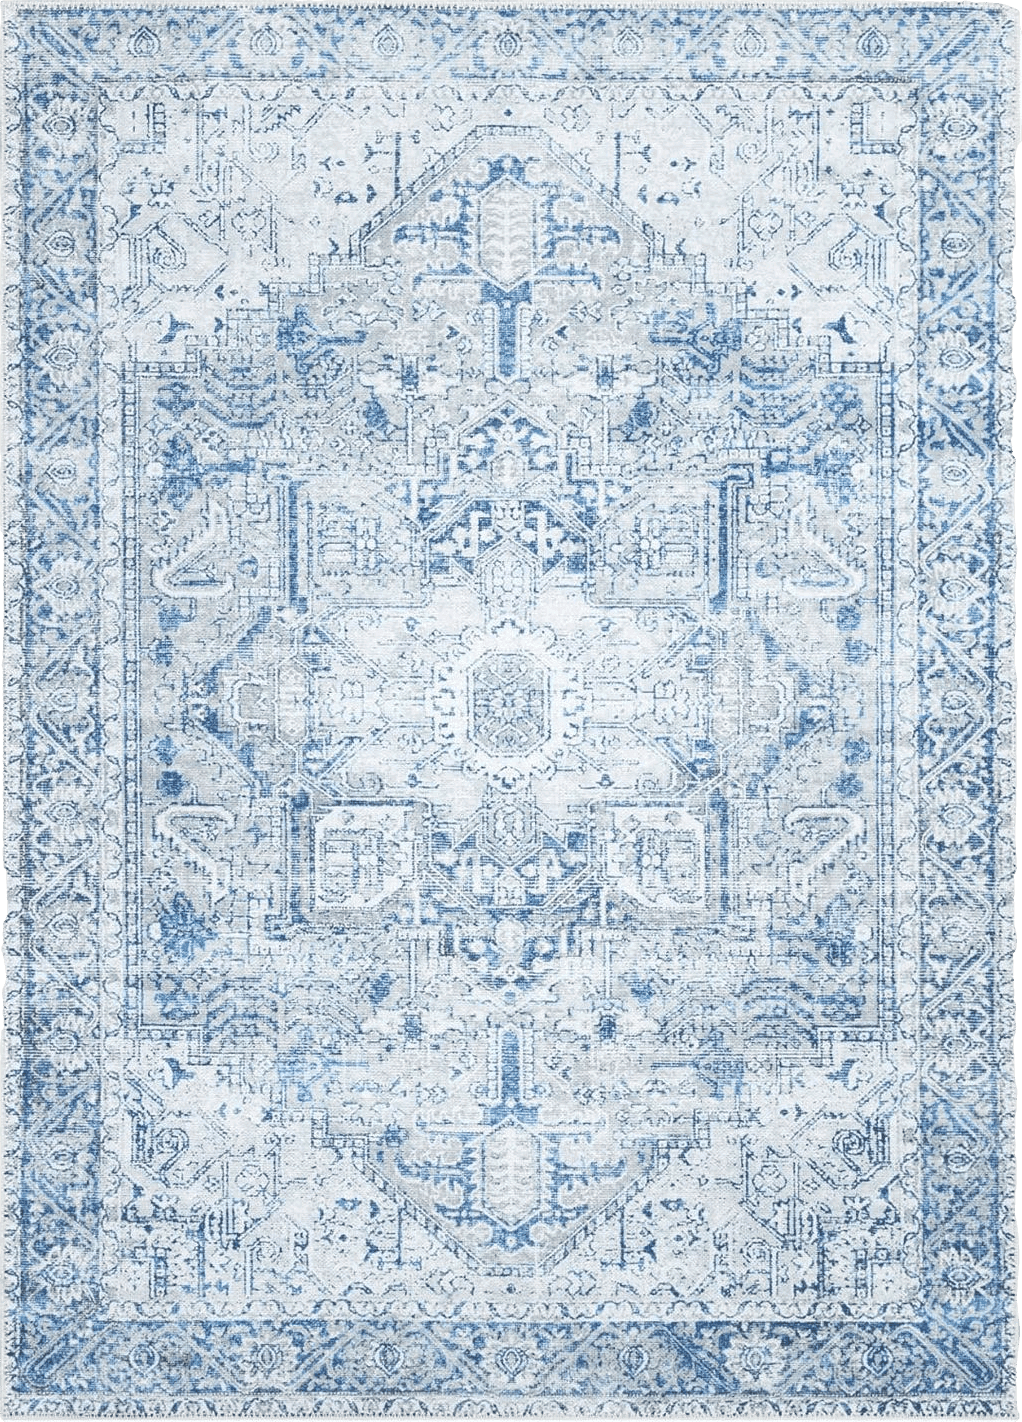 Bloom Rugs Washable Non-Slip 3' x 5' Rug - Blue/Gray Traditional Area Rug for Living Room, Bedroom, Dining Room, and Kitchen - Exact Size: 3' x 5'